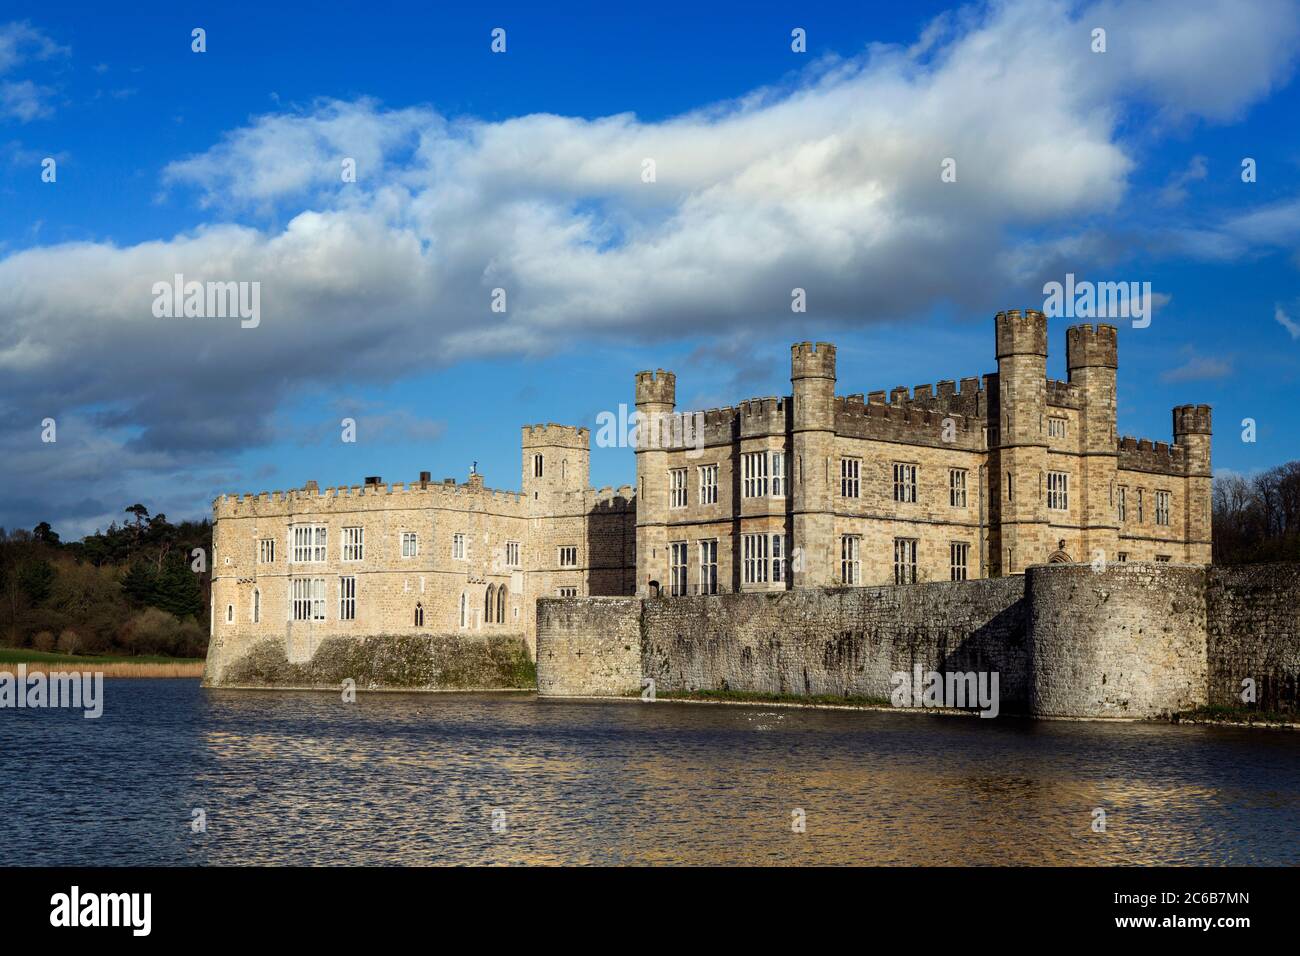 View across the lake to the castle, former home of Catherine of Aragon, first wife of Henry VIII, Leeds Castle, Kent, England, United Kingdom, Europe Stock Photo